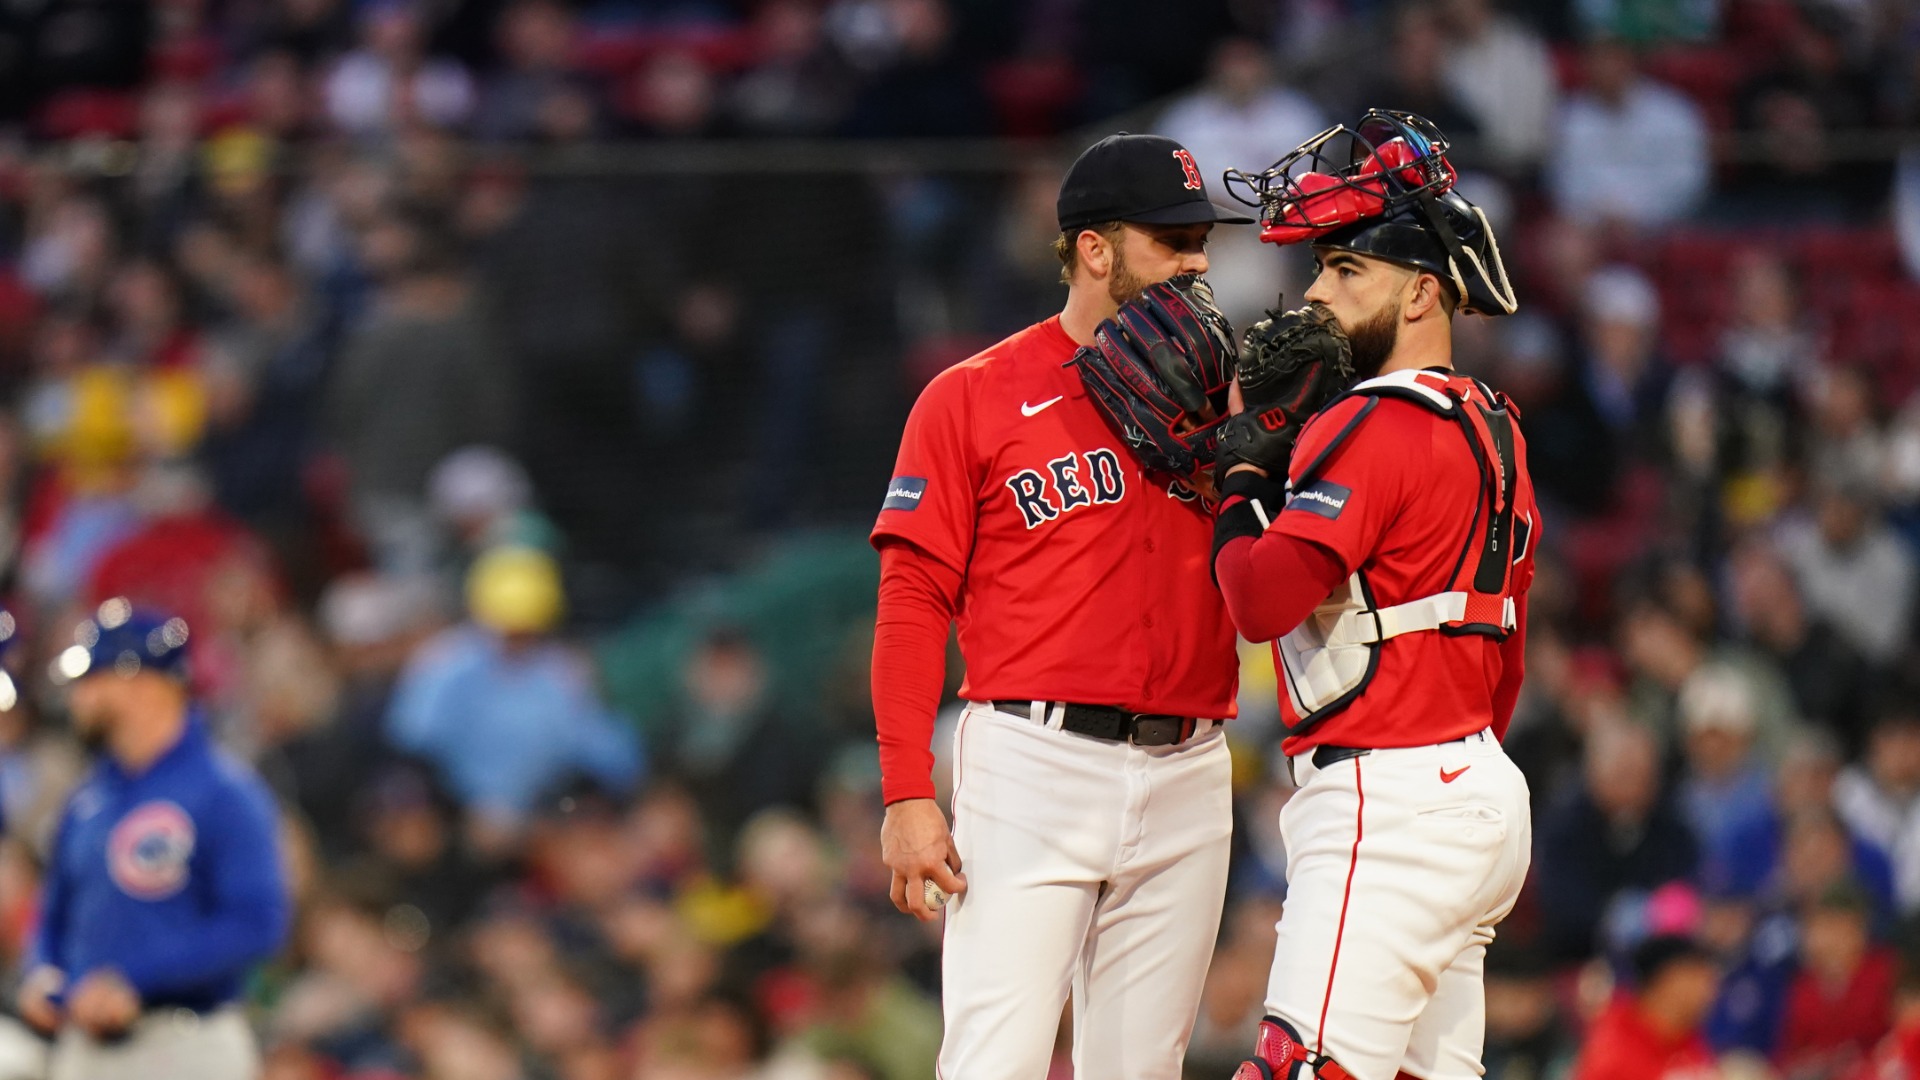 Red Sox Notes: Alex Cora Will ‘Take’ Loss Given Kutter
Crawford’s Record